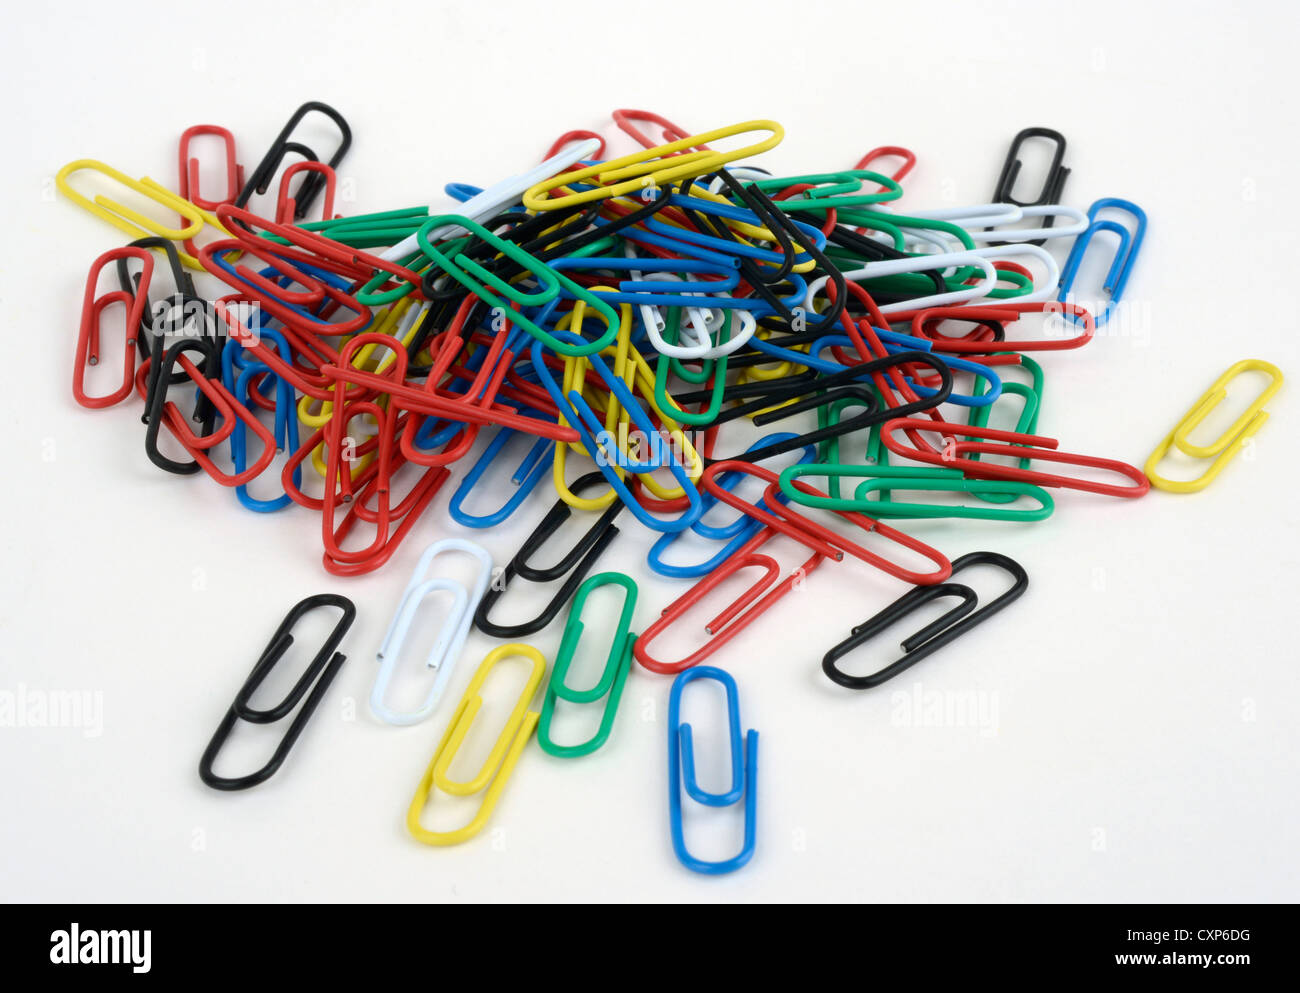 Colorful paper clips. Stock Photo